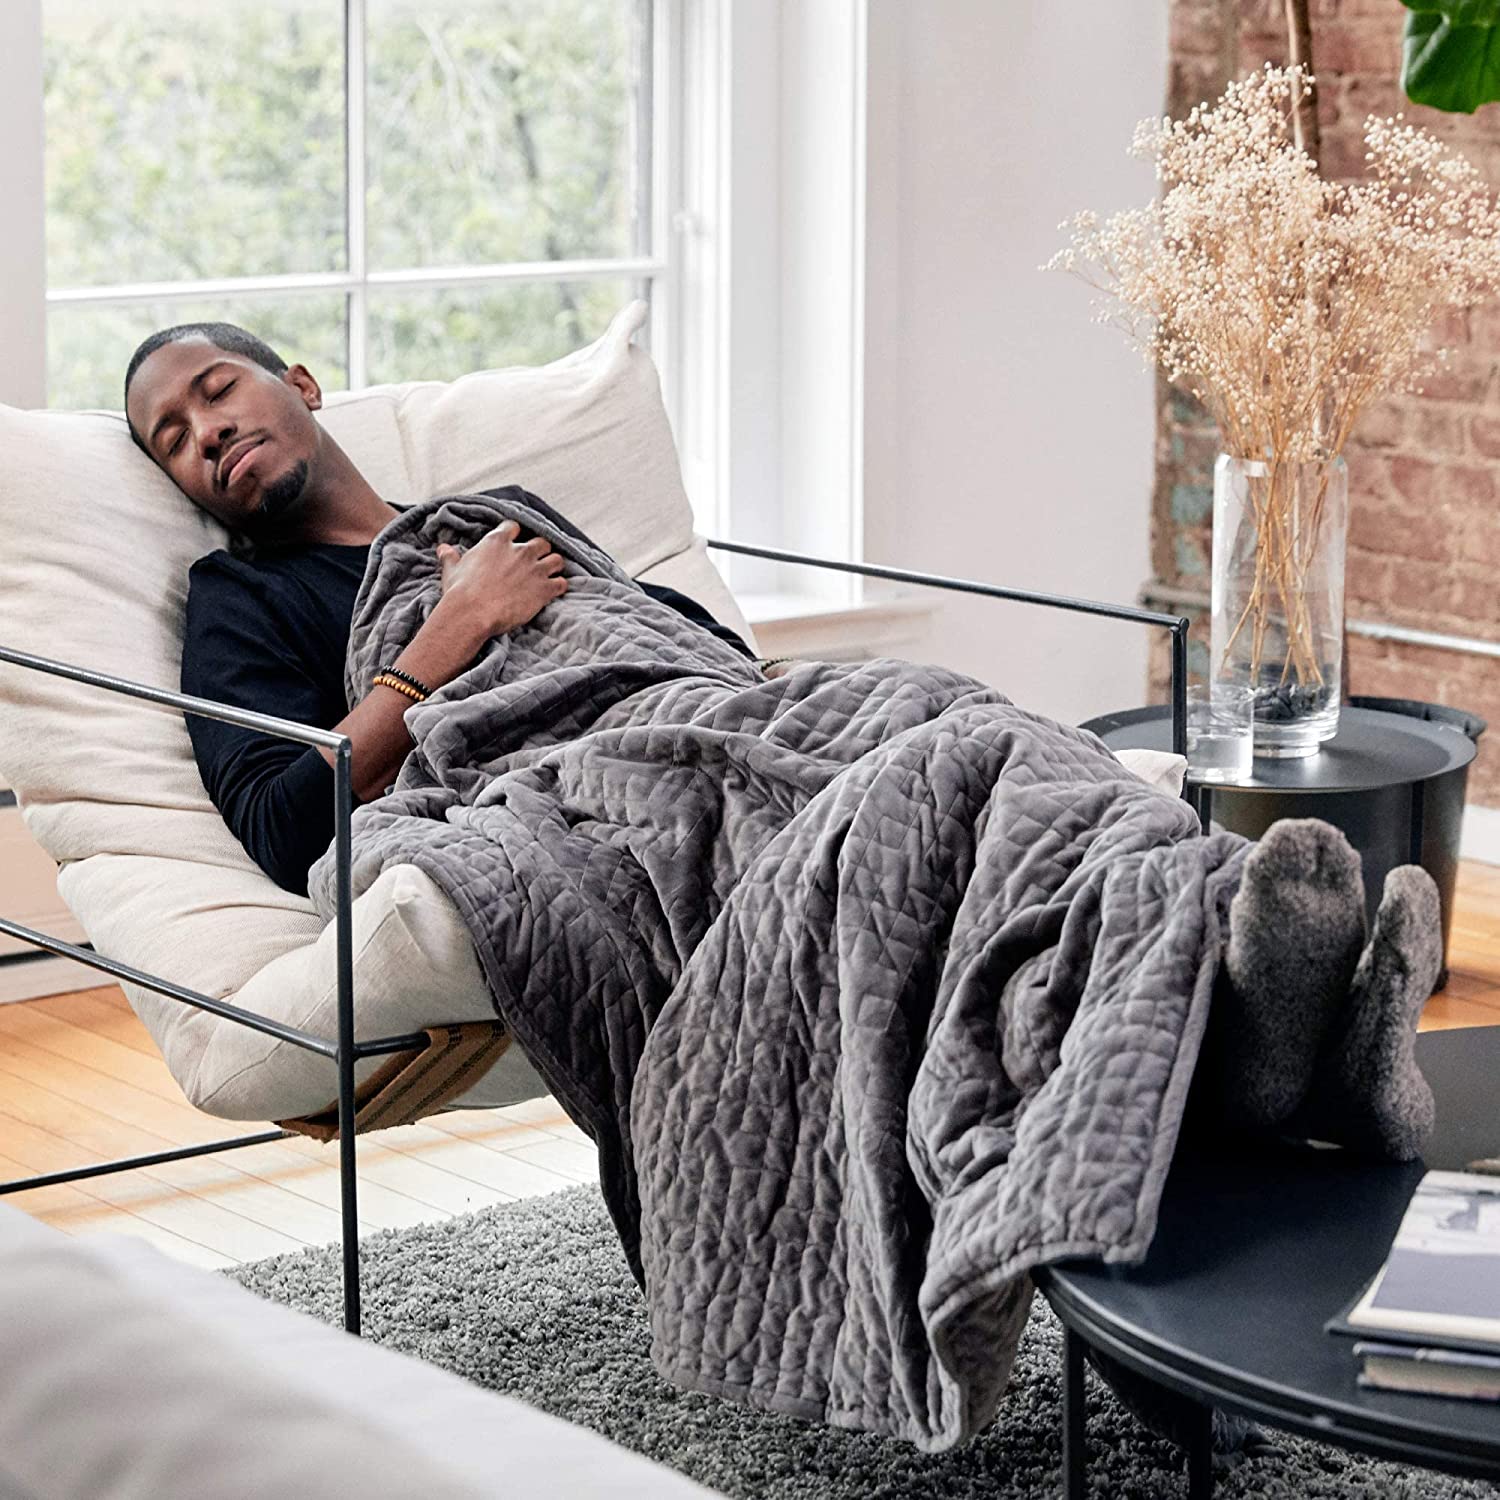 Weighted Blanket Best 15 Valentine's Day Gift Ideas for Husband - 17